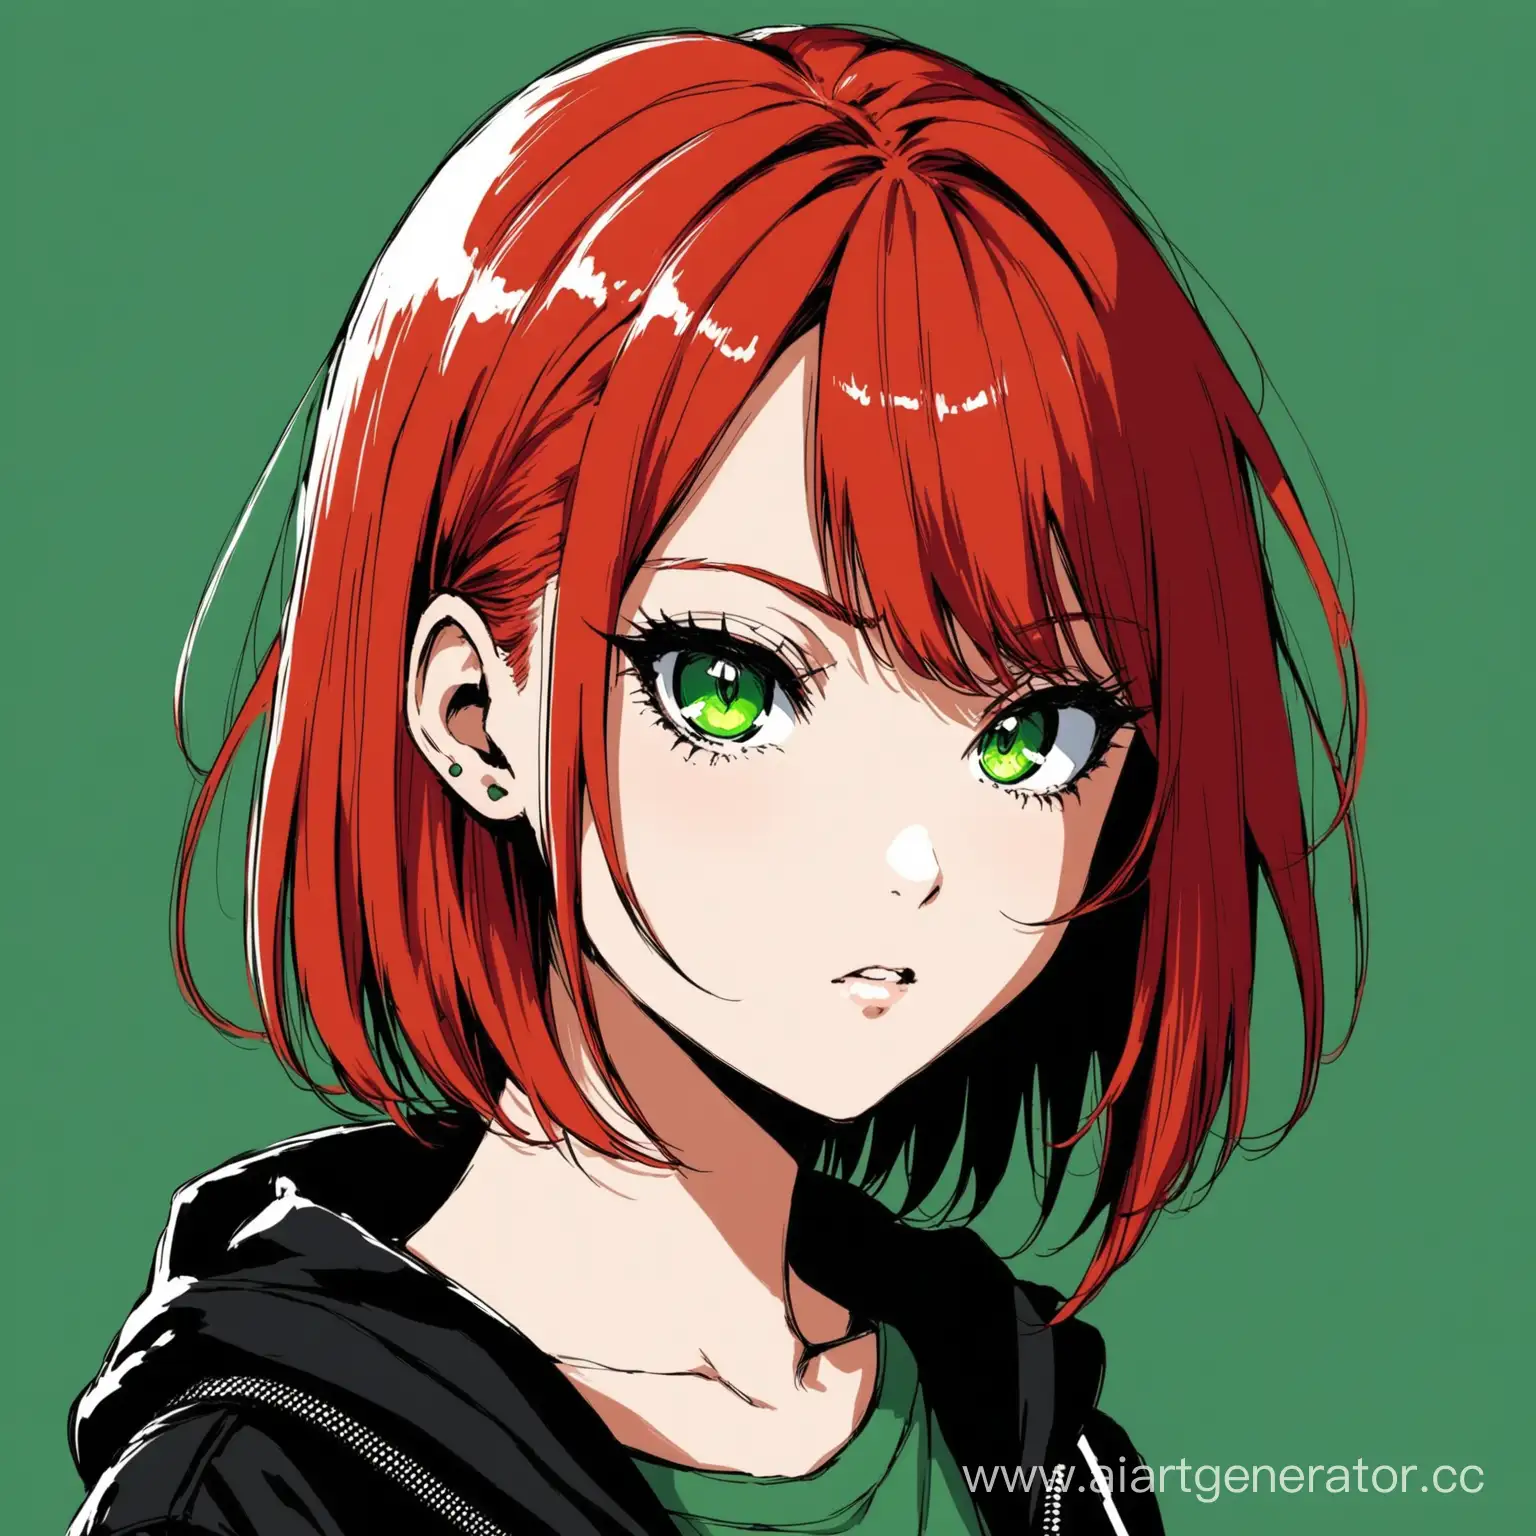 Anime-Redhead-Girl-with-Green-Eyes-in-PostPunk-Style